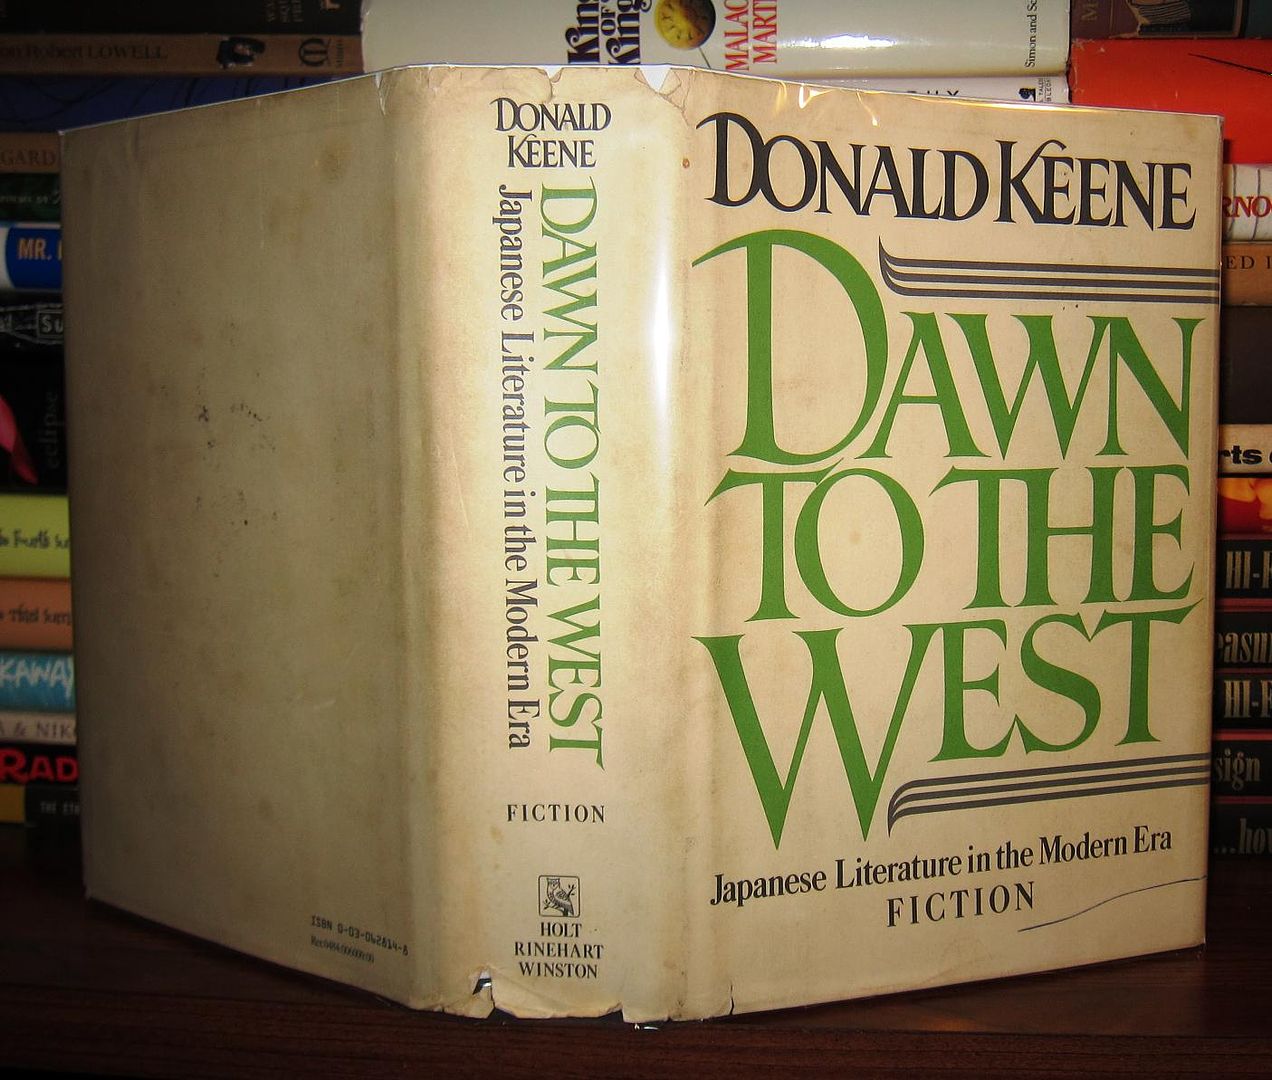 KEENE, DONALD - Dawn to the West Japanese Literature in the Modern Era Fiction